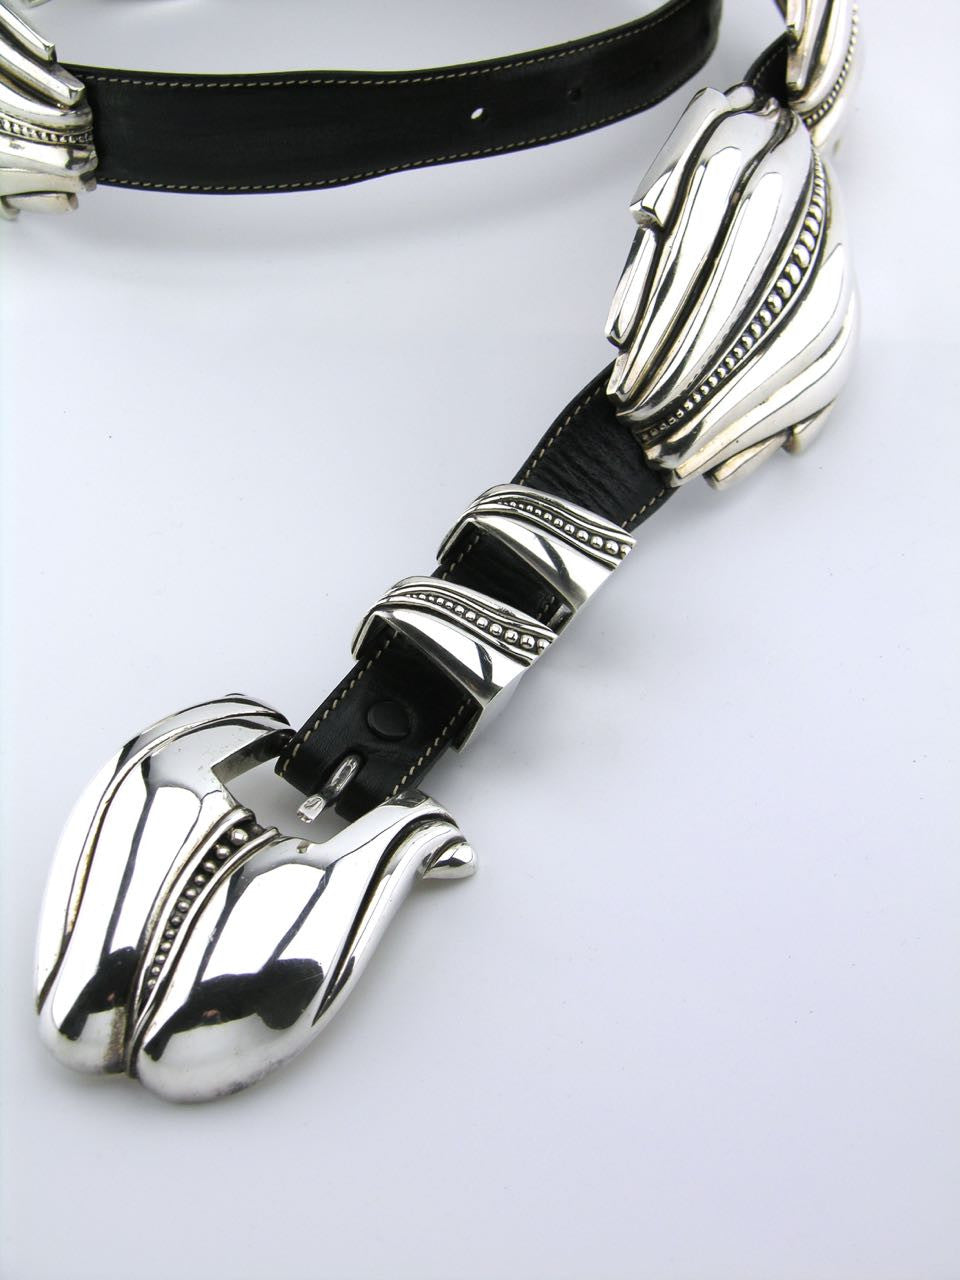 Barry Kieselstein-Cord silver and leather "Pecos Conchas" belt